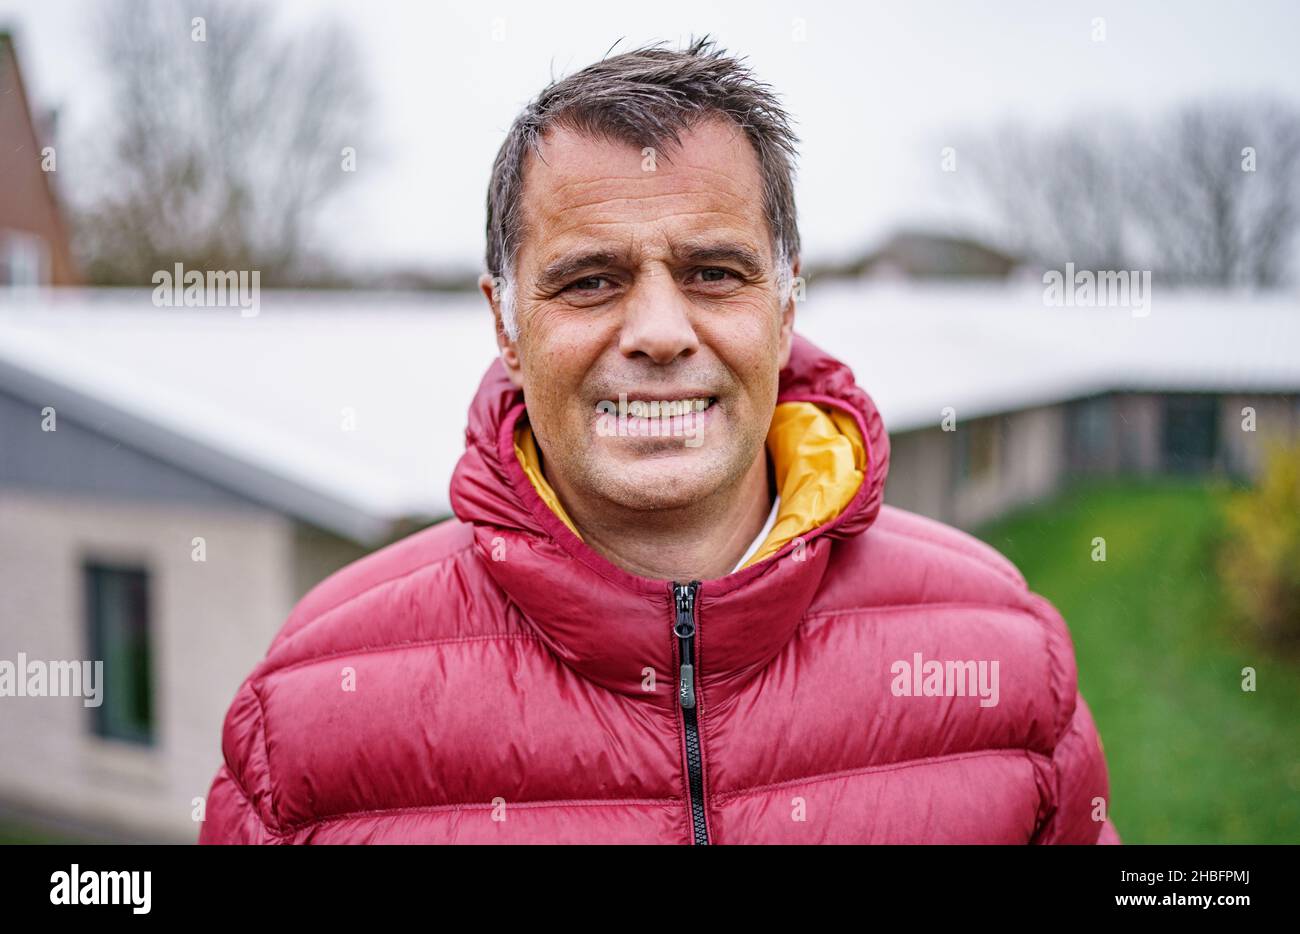 Insel Pellworm, Germany. 18th Nov, 2021. Walter Herrig, principal of the Hermann Neuton Paulsen School on the island of Pellworm, stands in front of one of the school buildings. The search for teachers for the island often takes longer than in larger towns. Credit: Axel Heimken/dpa/Alamy Live News Stock Photo